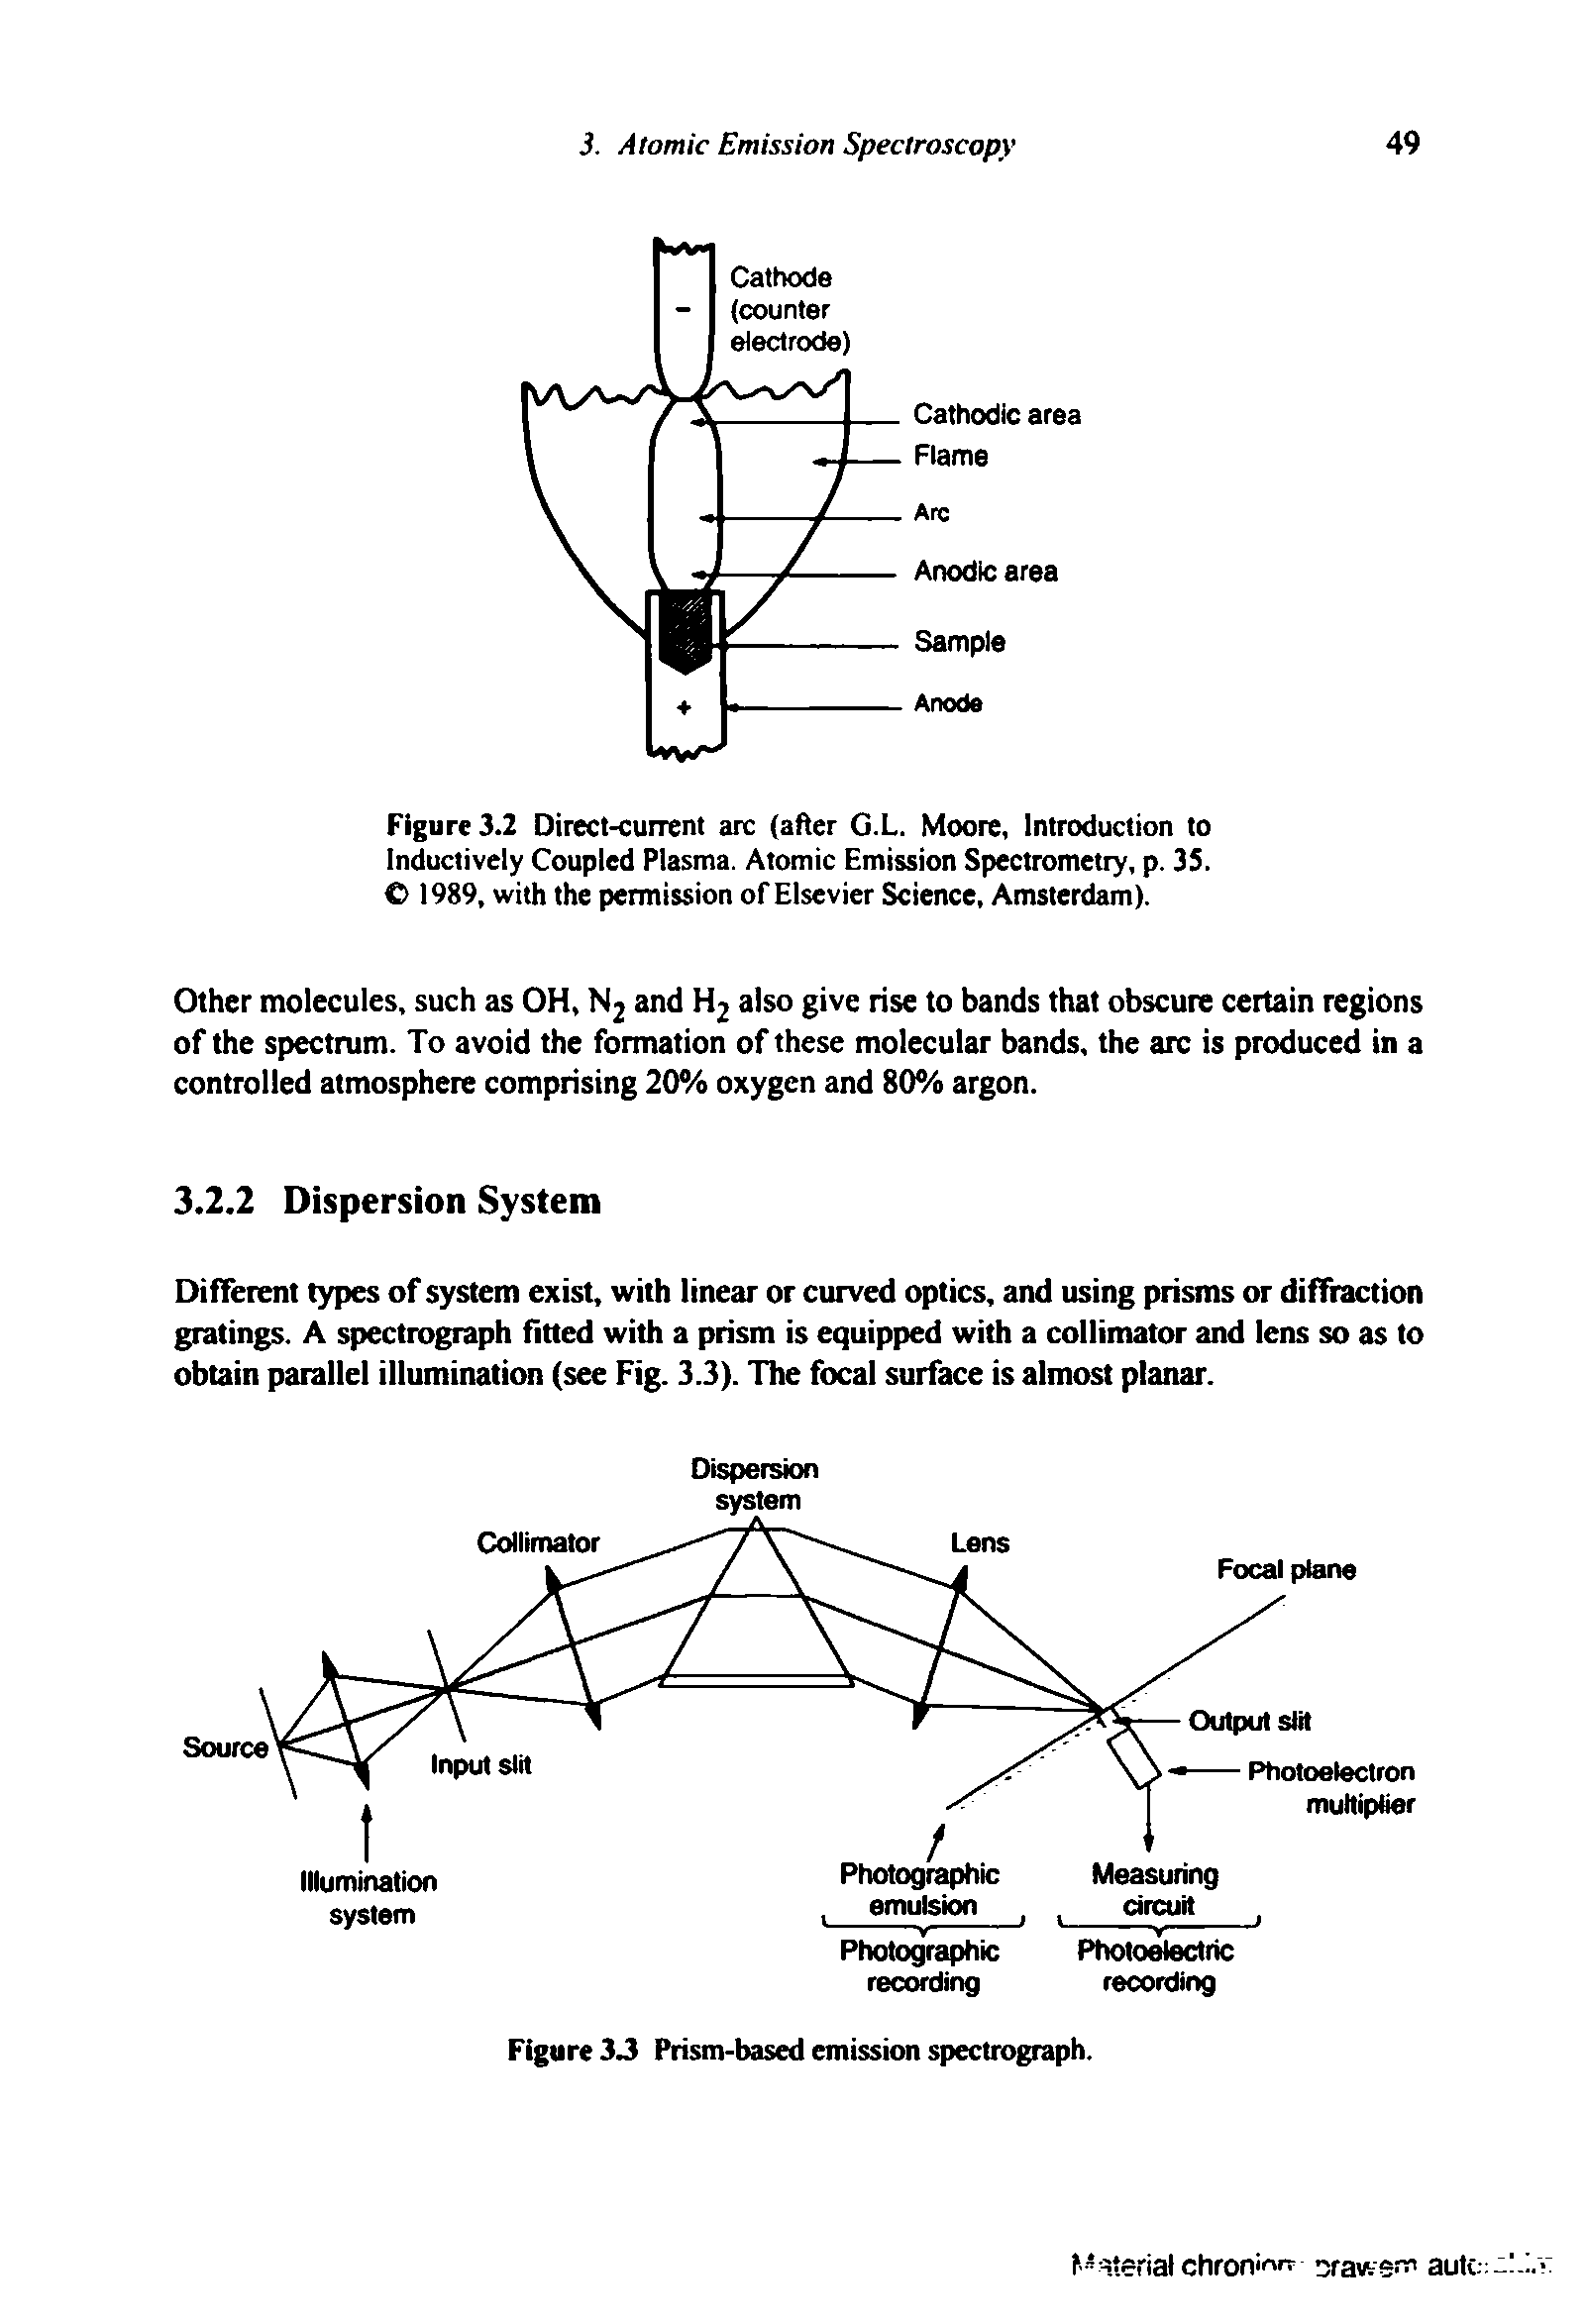 Figure 3.2 Direct-current arc (after G.L. Moore, Introduction to Inductively Coupled Plasma. Atomic Emission Spectrometry, p. 35. C 1989, with the permission of Elsevier Science, Amsterdam).